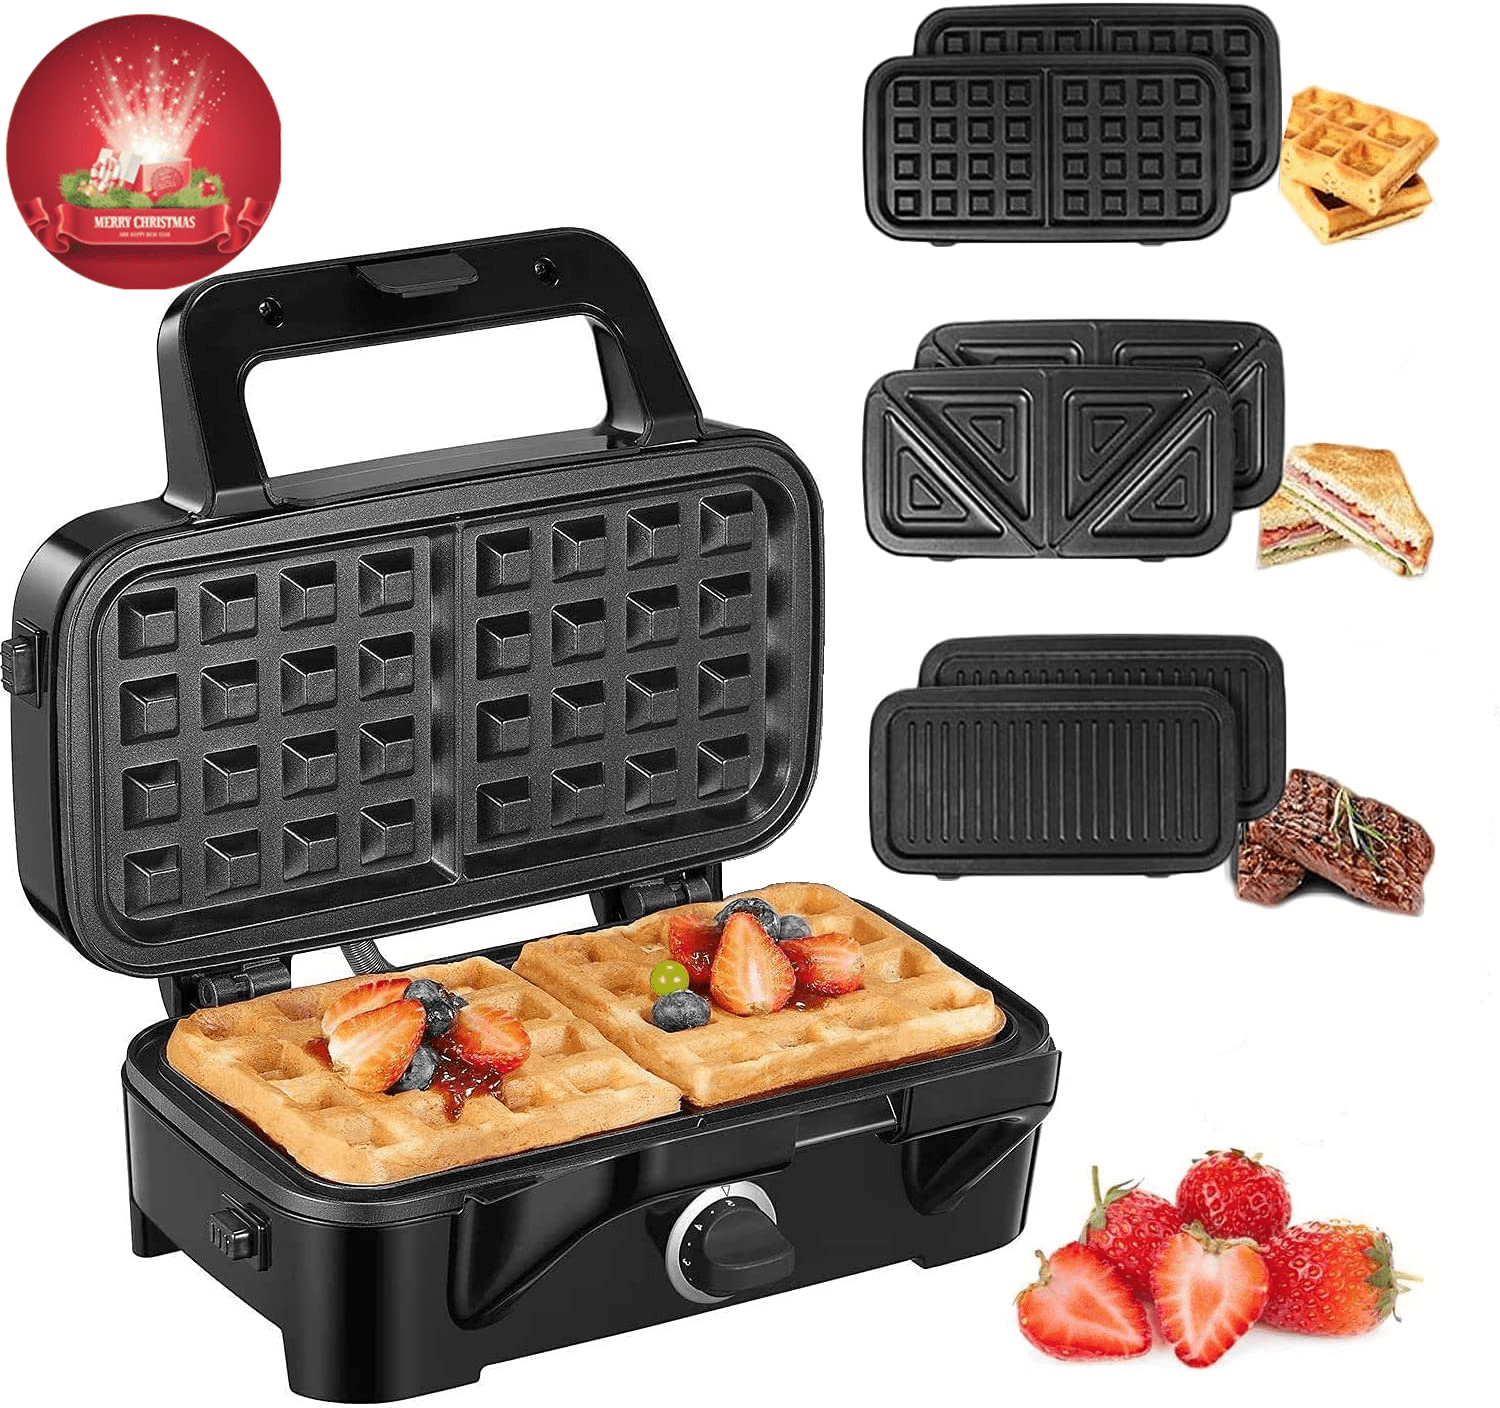 HOUSNAT 3 in 1 Sandwich Maker, Waffle Maker with Removable Plates